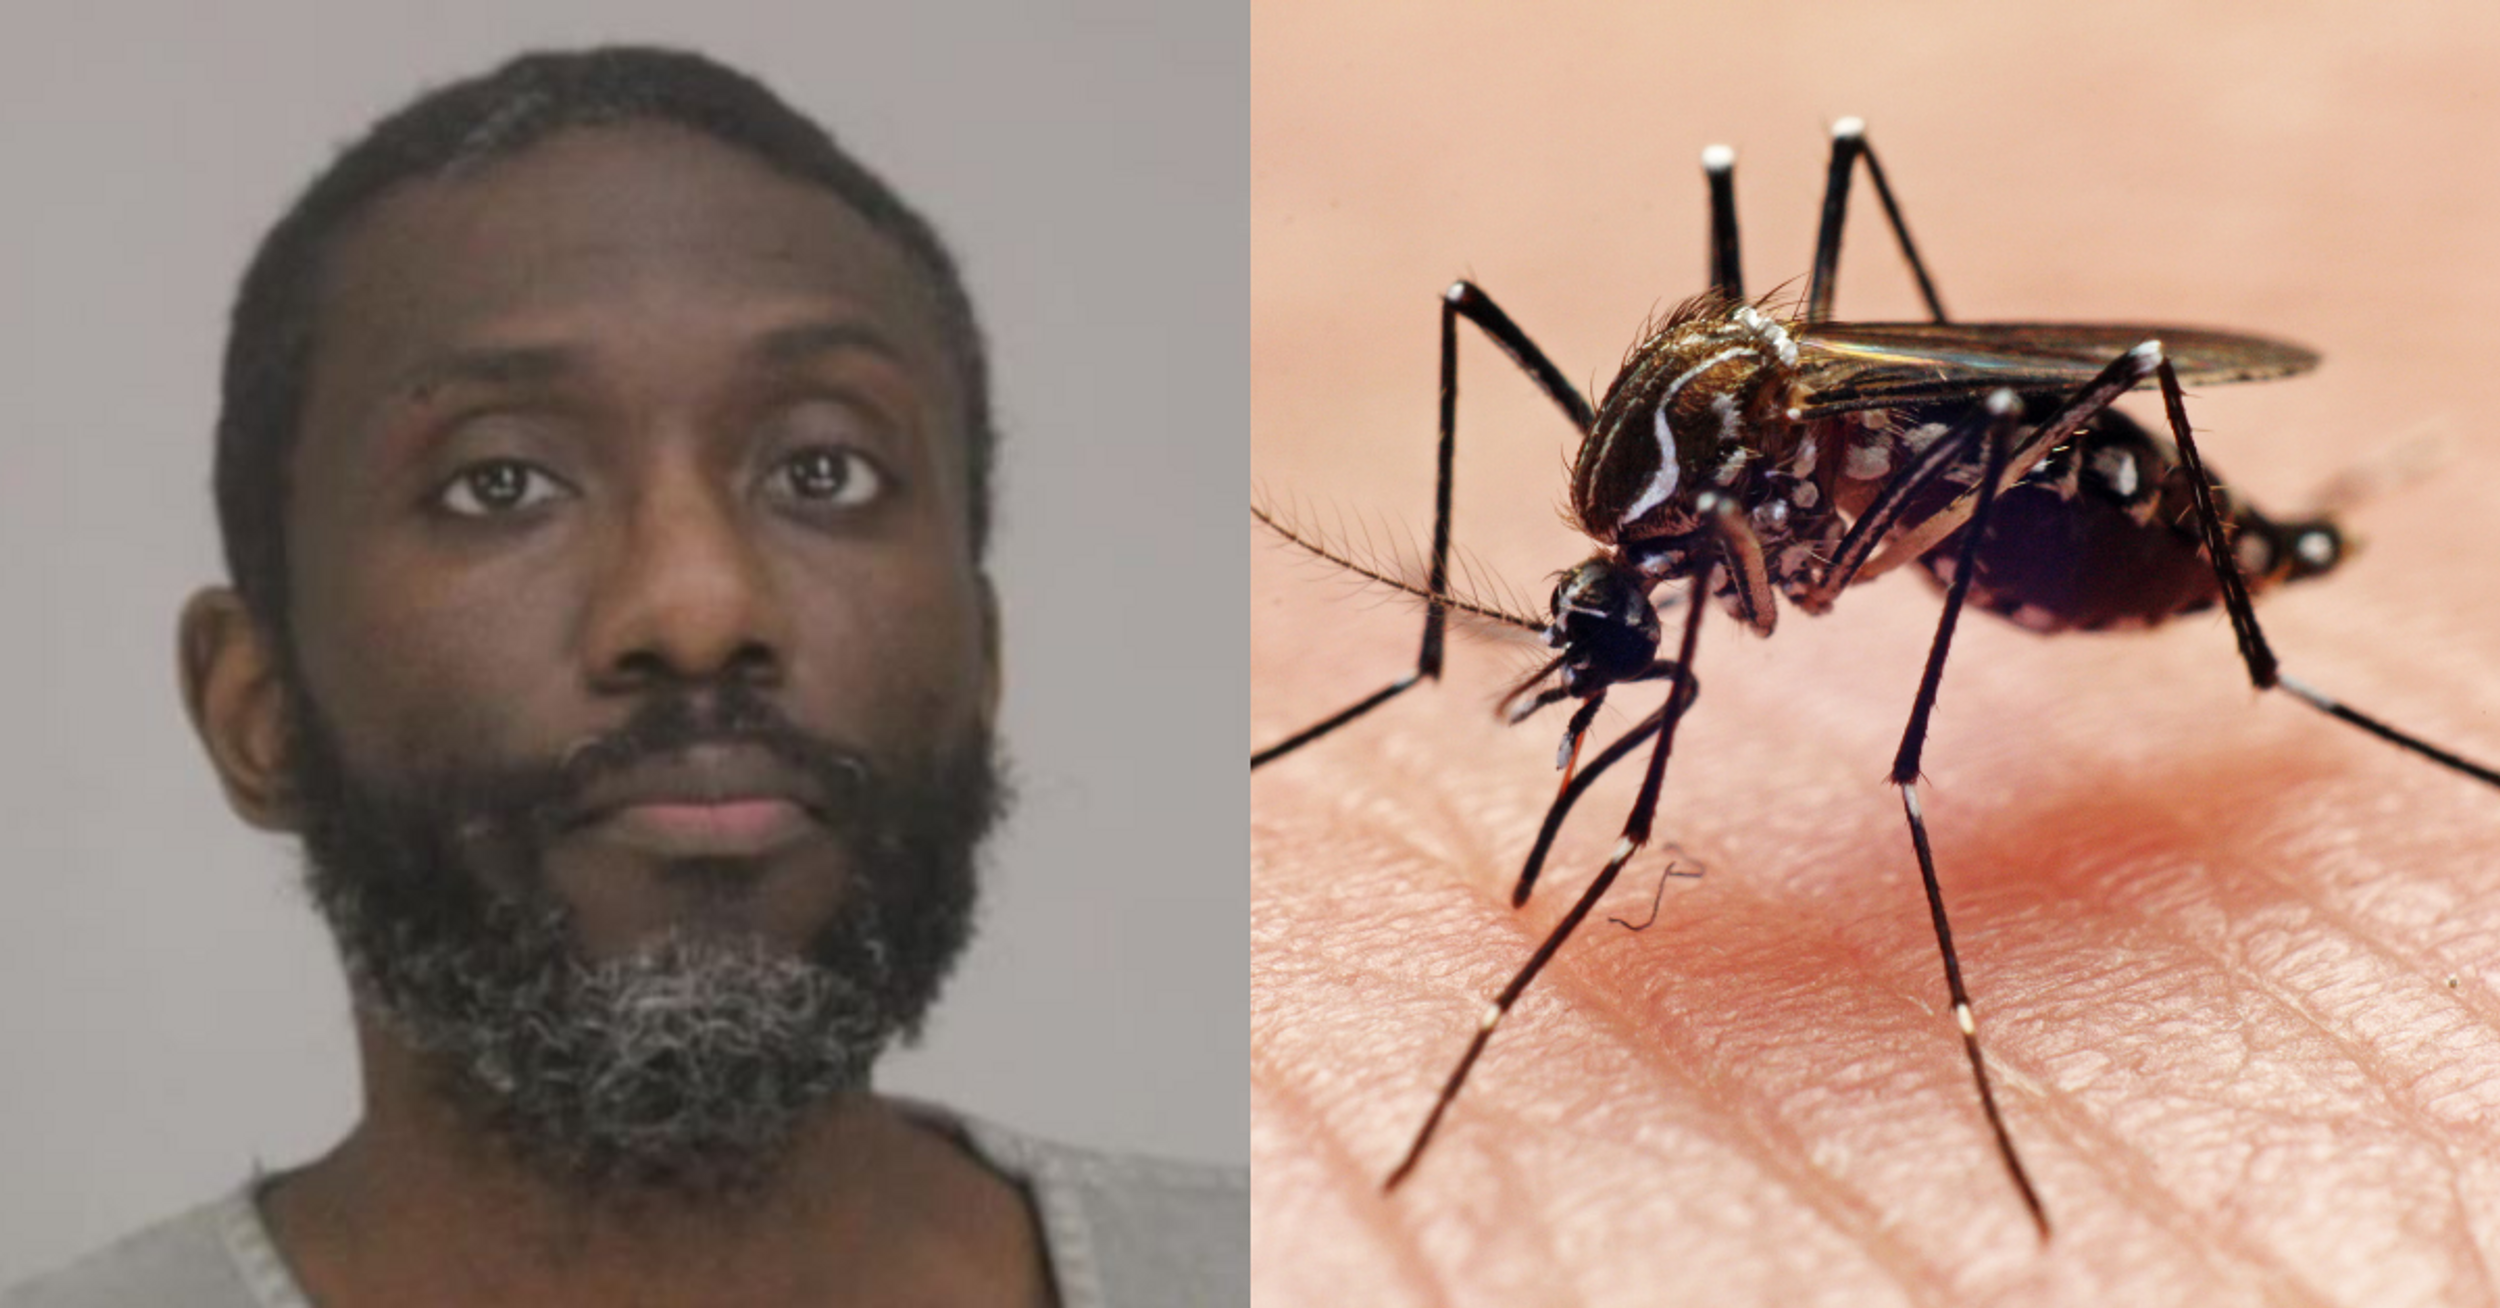 Texas Man Charged After Beating Roommate With Stick In Argument Over 'What A Mosquito Looks Like'